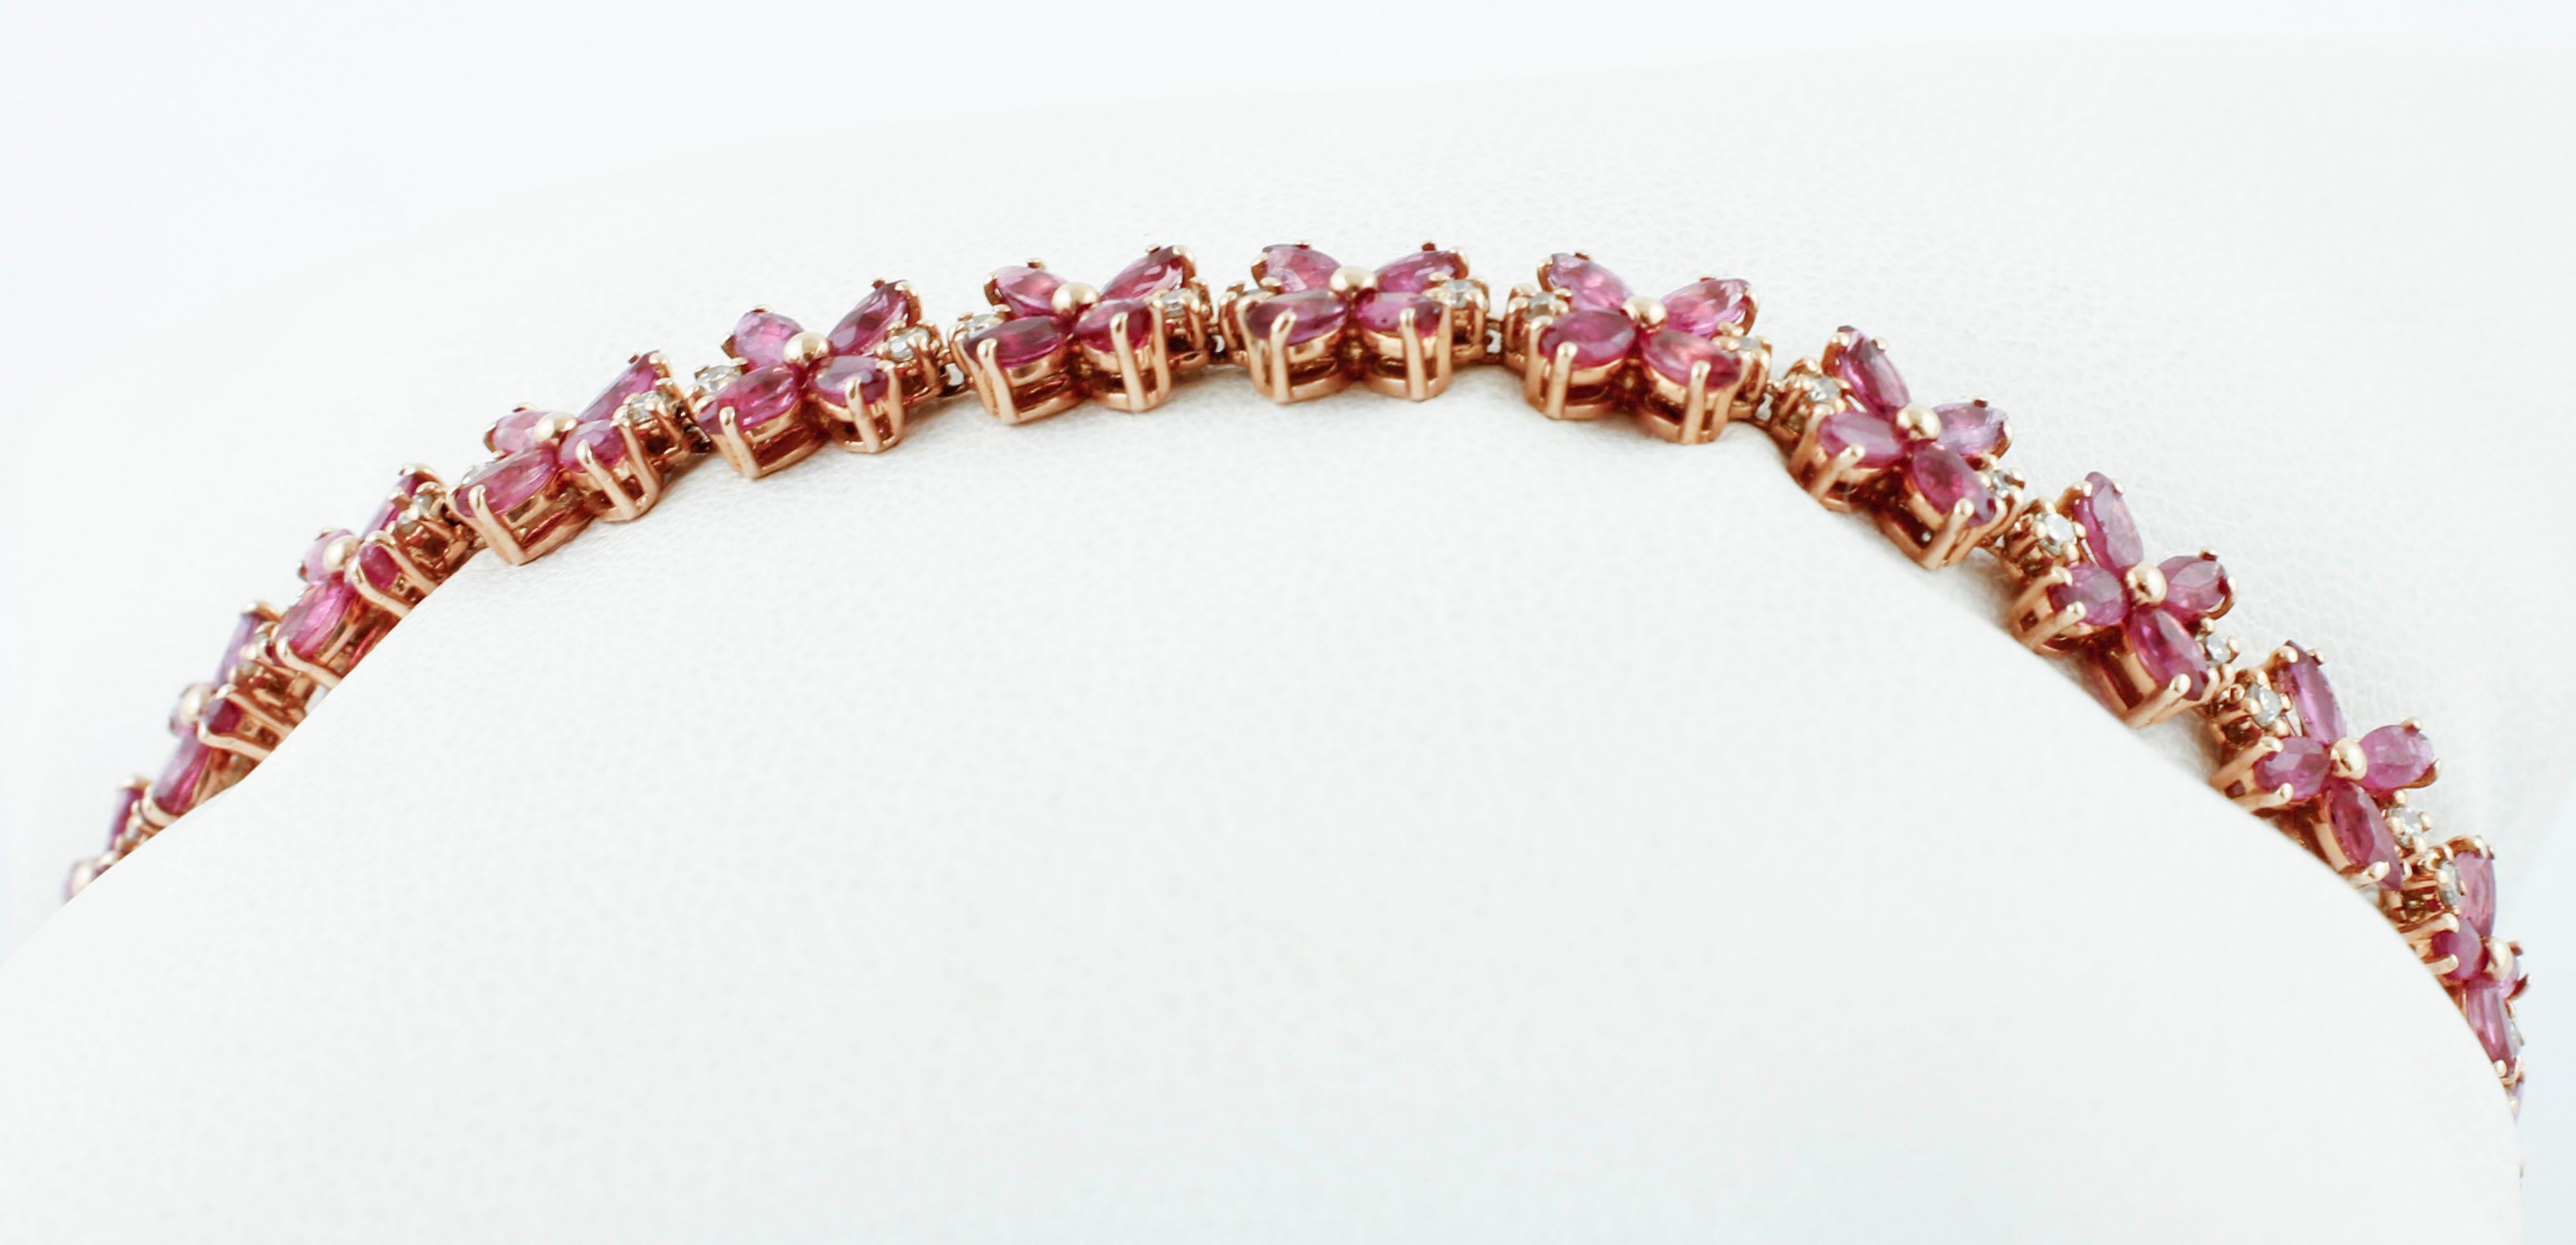 Unique style flower shape link tennis bracelet realized in 14K rose gold and mounted with 7,3 ct of rubies like petals and, to decorate, 0,61 ct of diamonds.
This bracelet is totally handmade by Italian master goldsmiths.
Diamonds 0,61 ct
Rubies 7,3